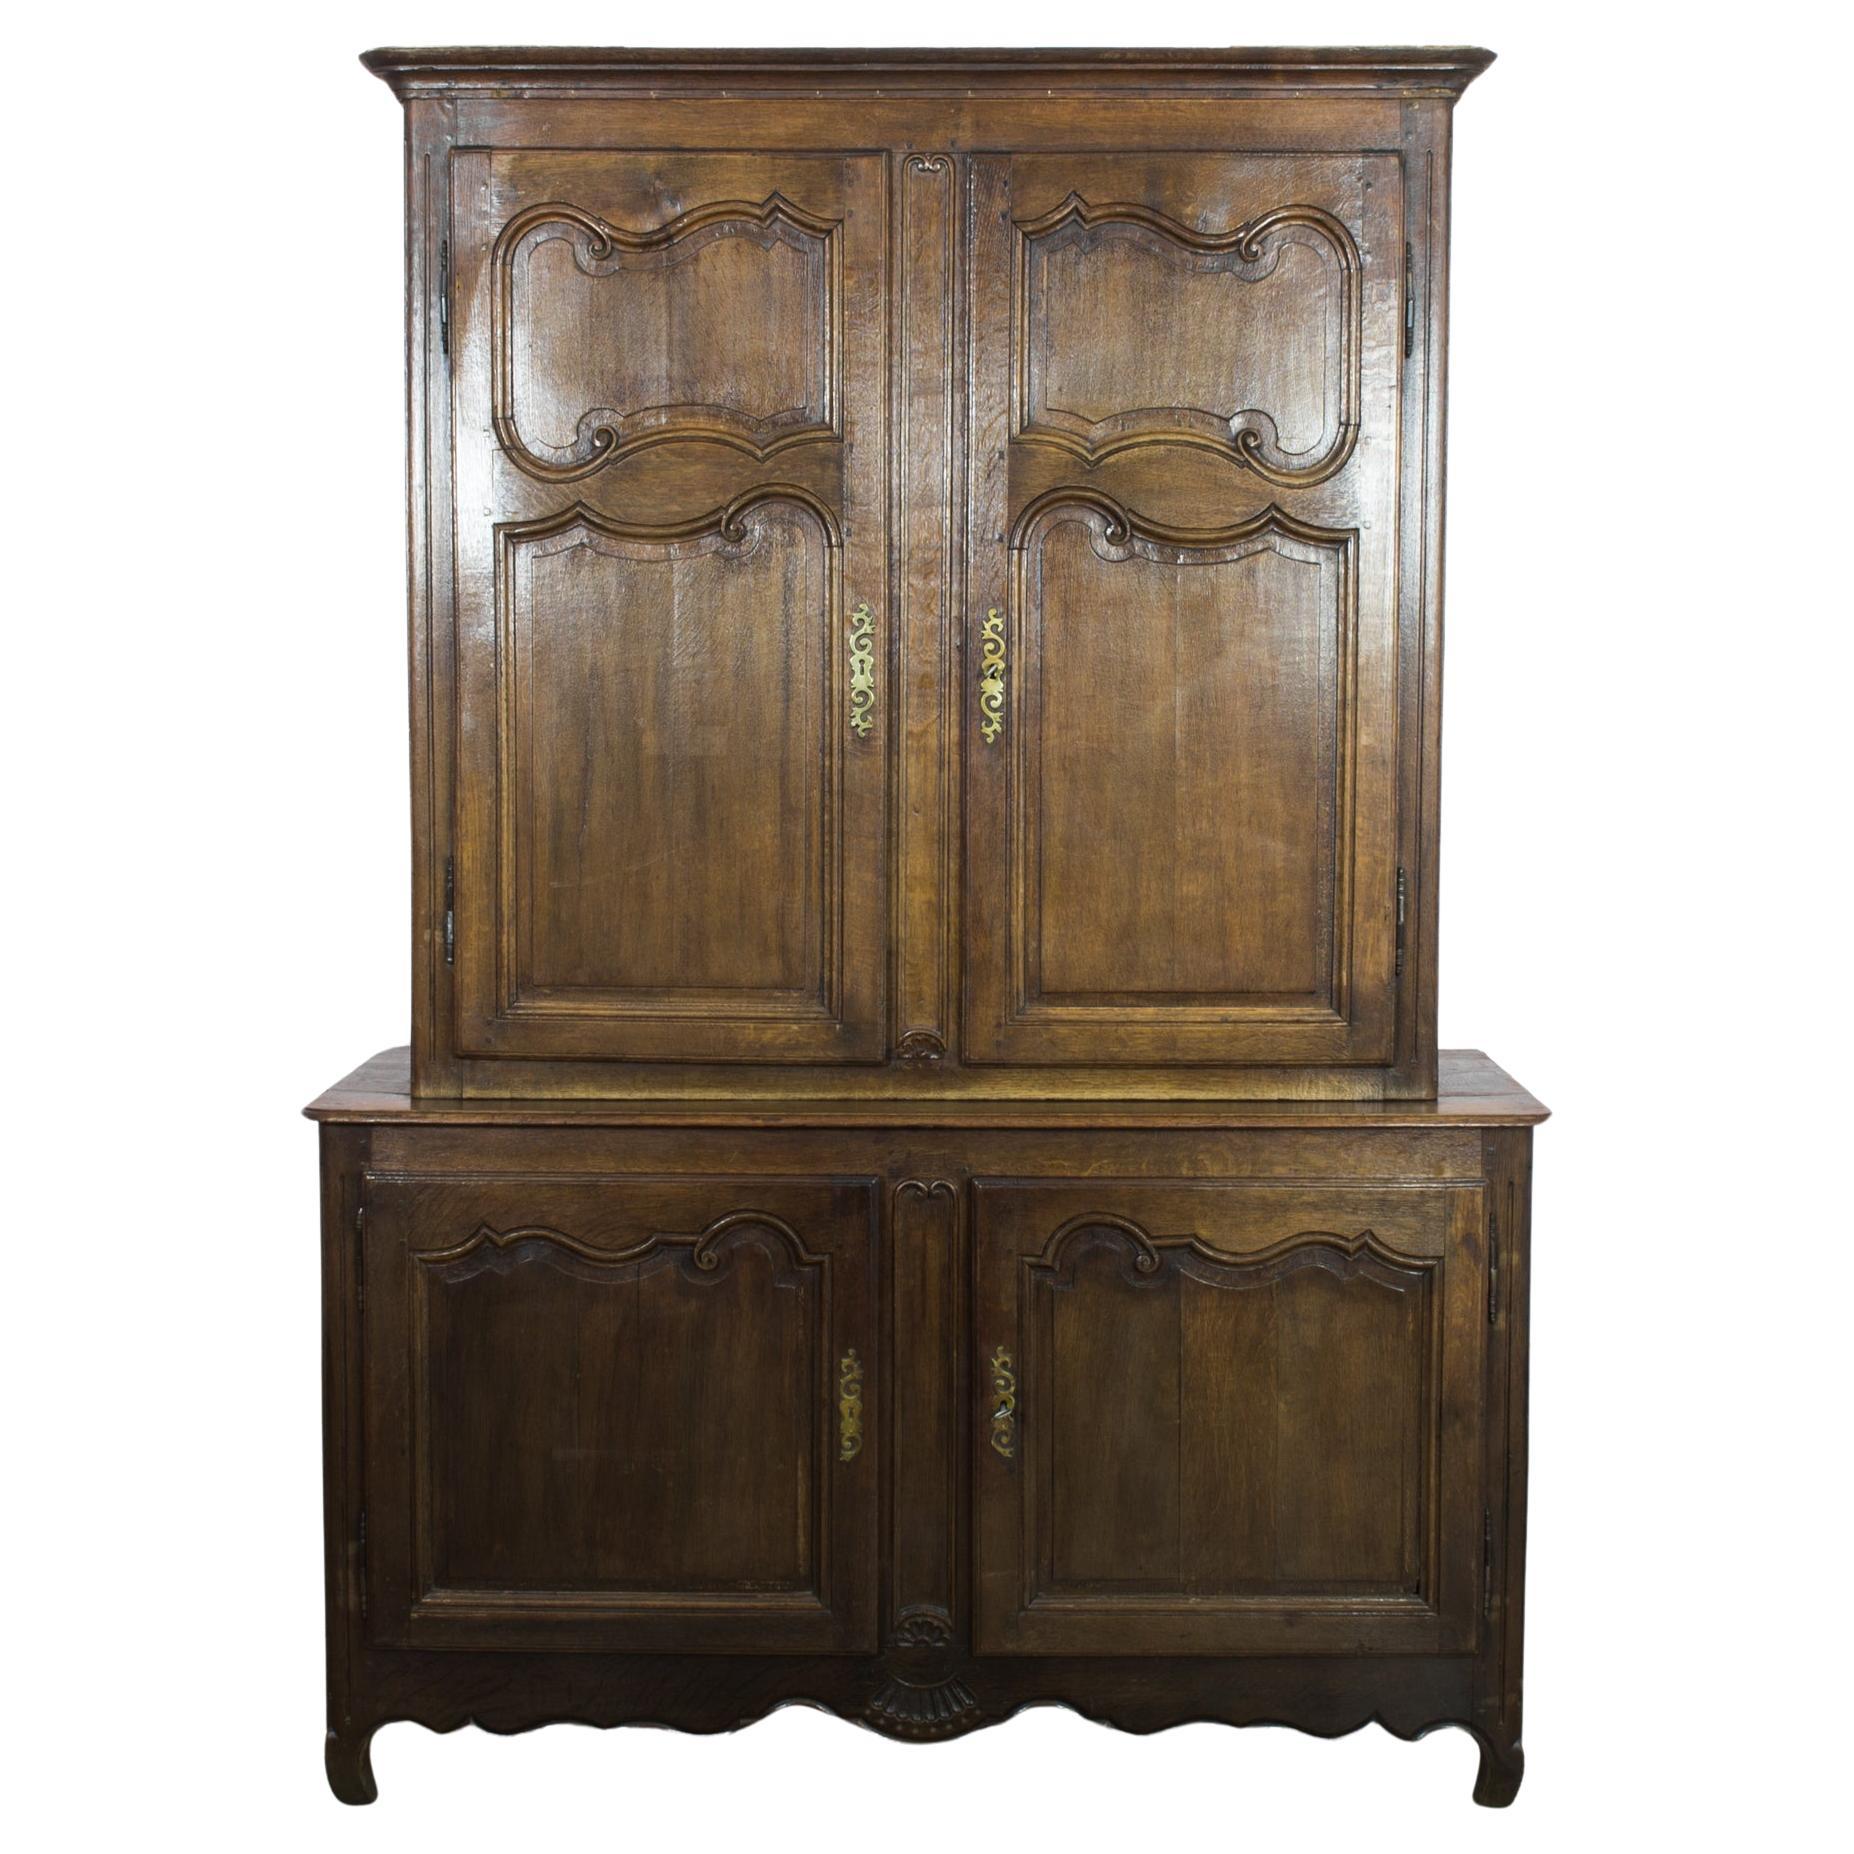 1860s French Wooden Cabinet with Original Patina